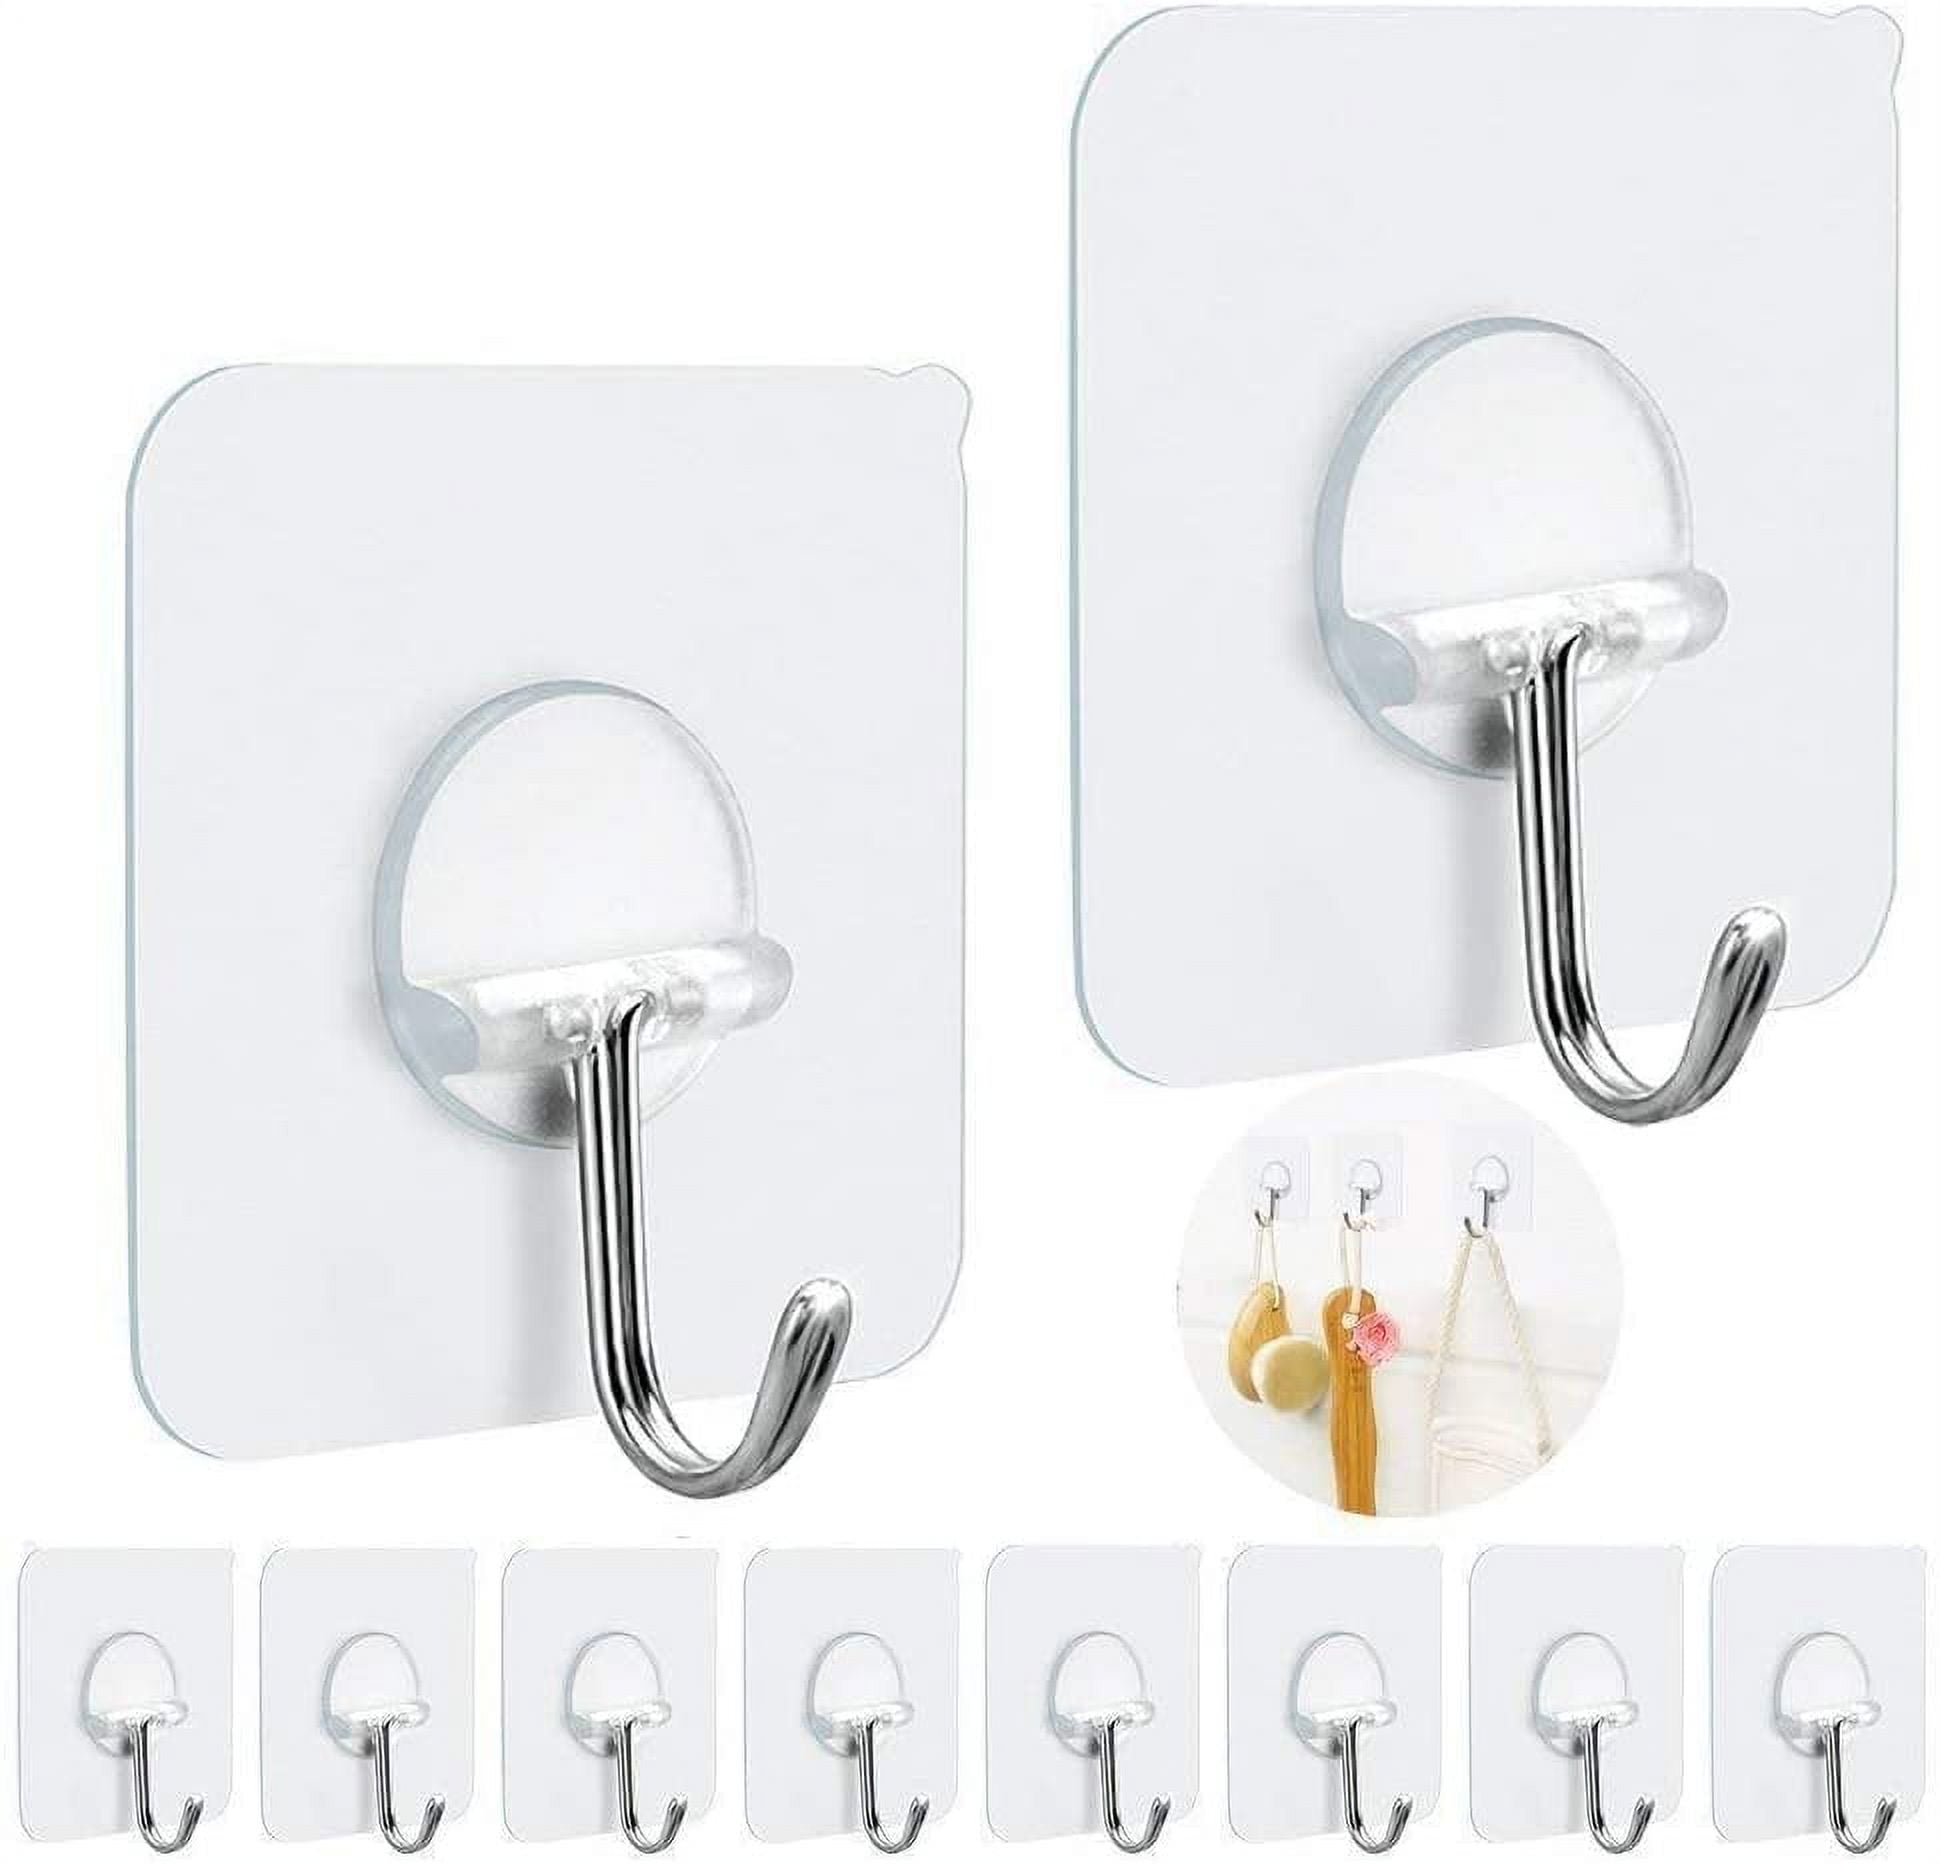 Generic Fotosnow Adhesive Hooks Heavy Duty 15lbs(Max) Transparent Wall Hooks  Reusable Seamless Shower Hooks Stick on Hooks for Hanging